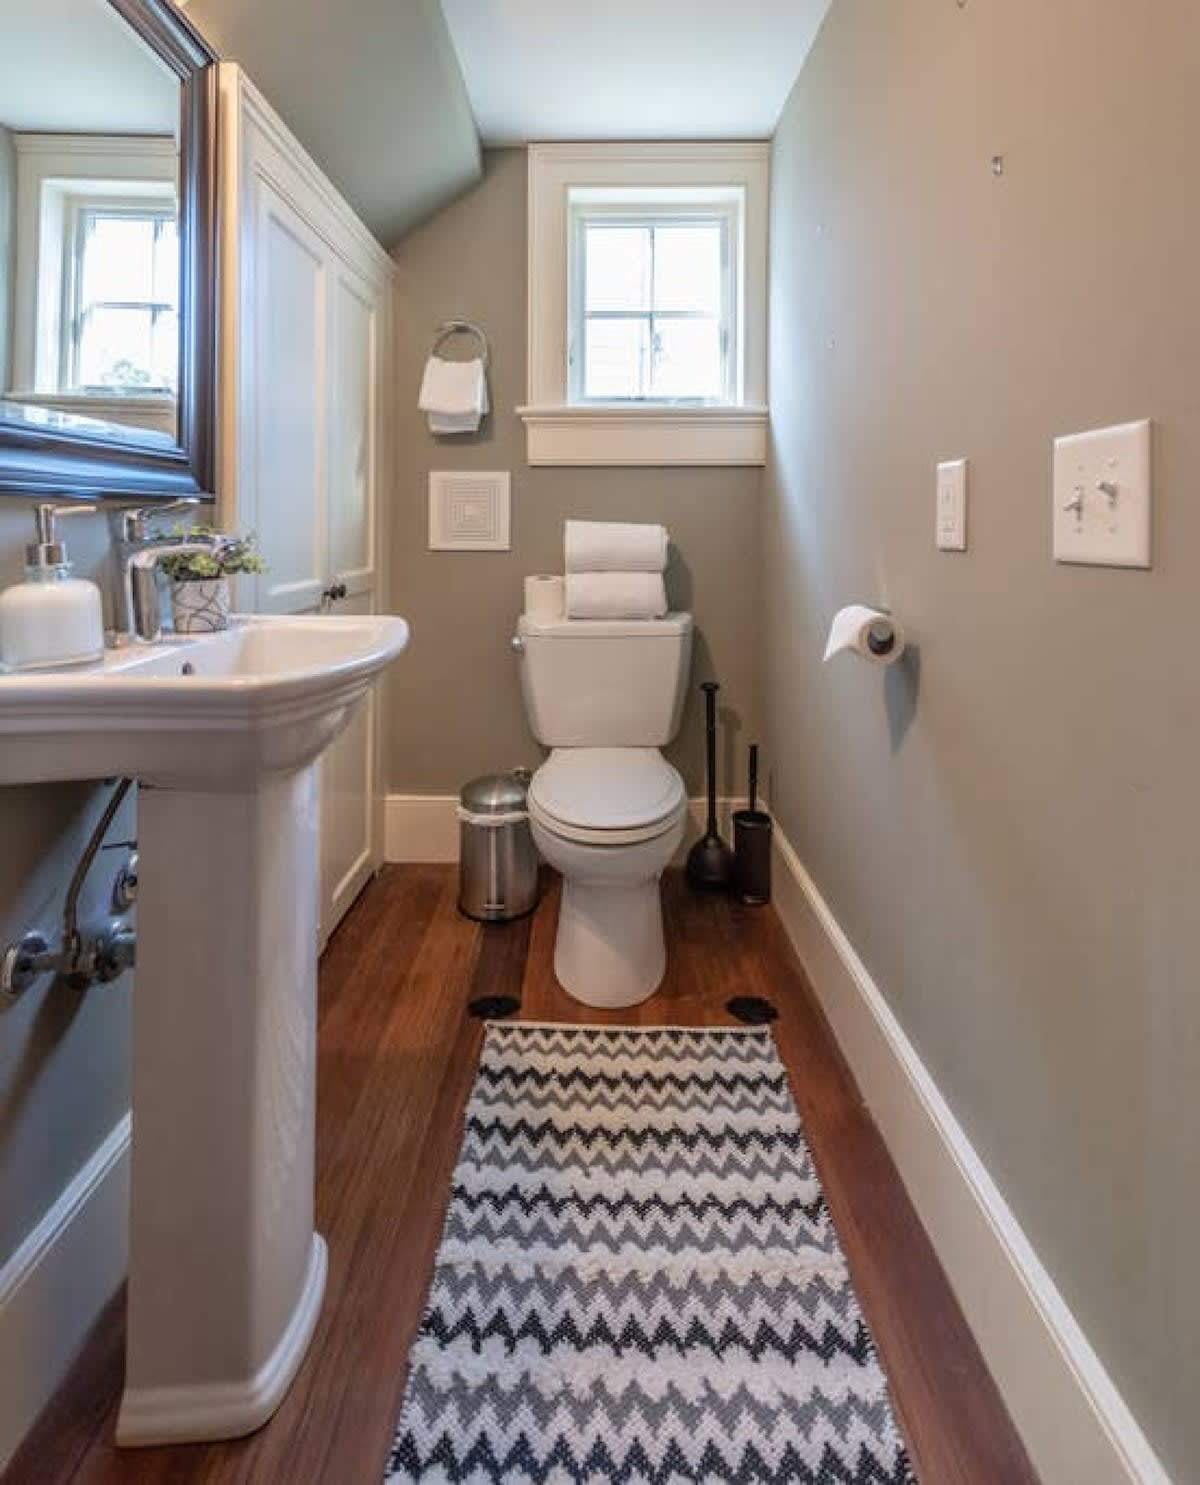 Half Bath in Detached Carriage House